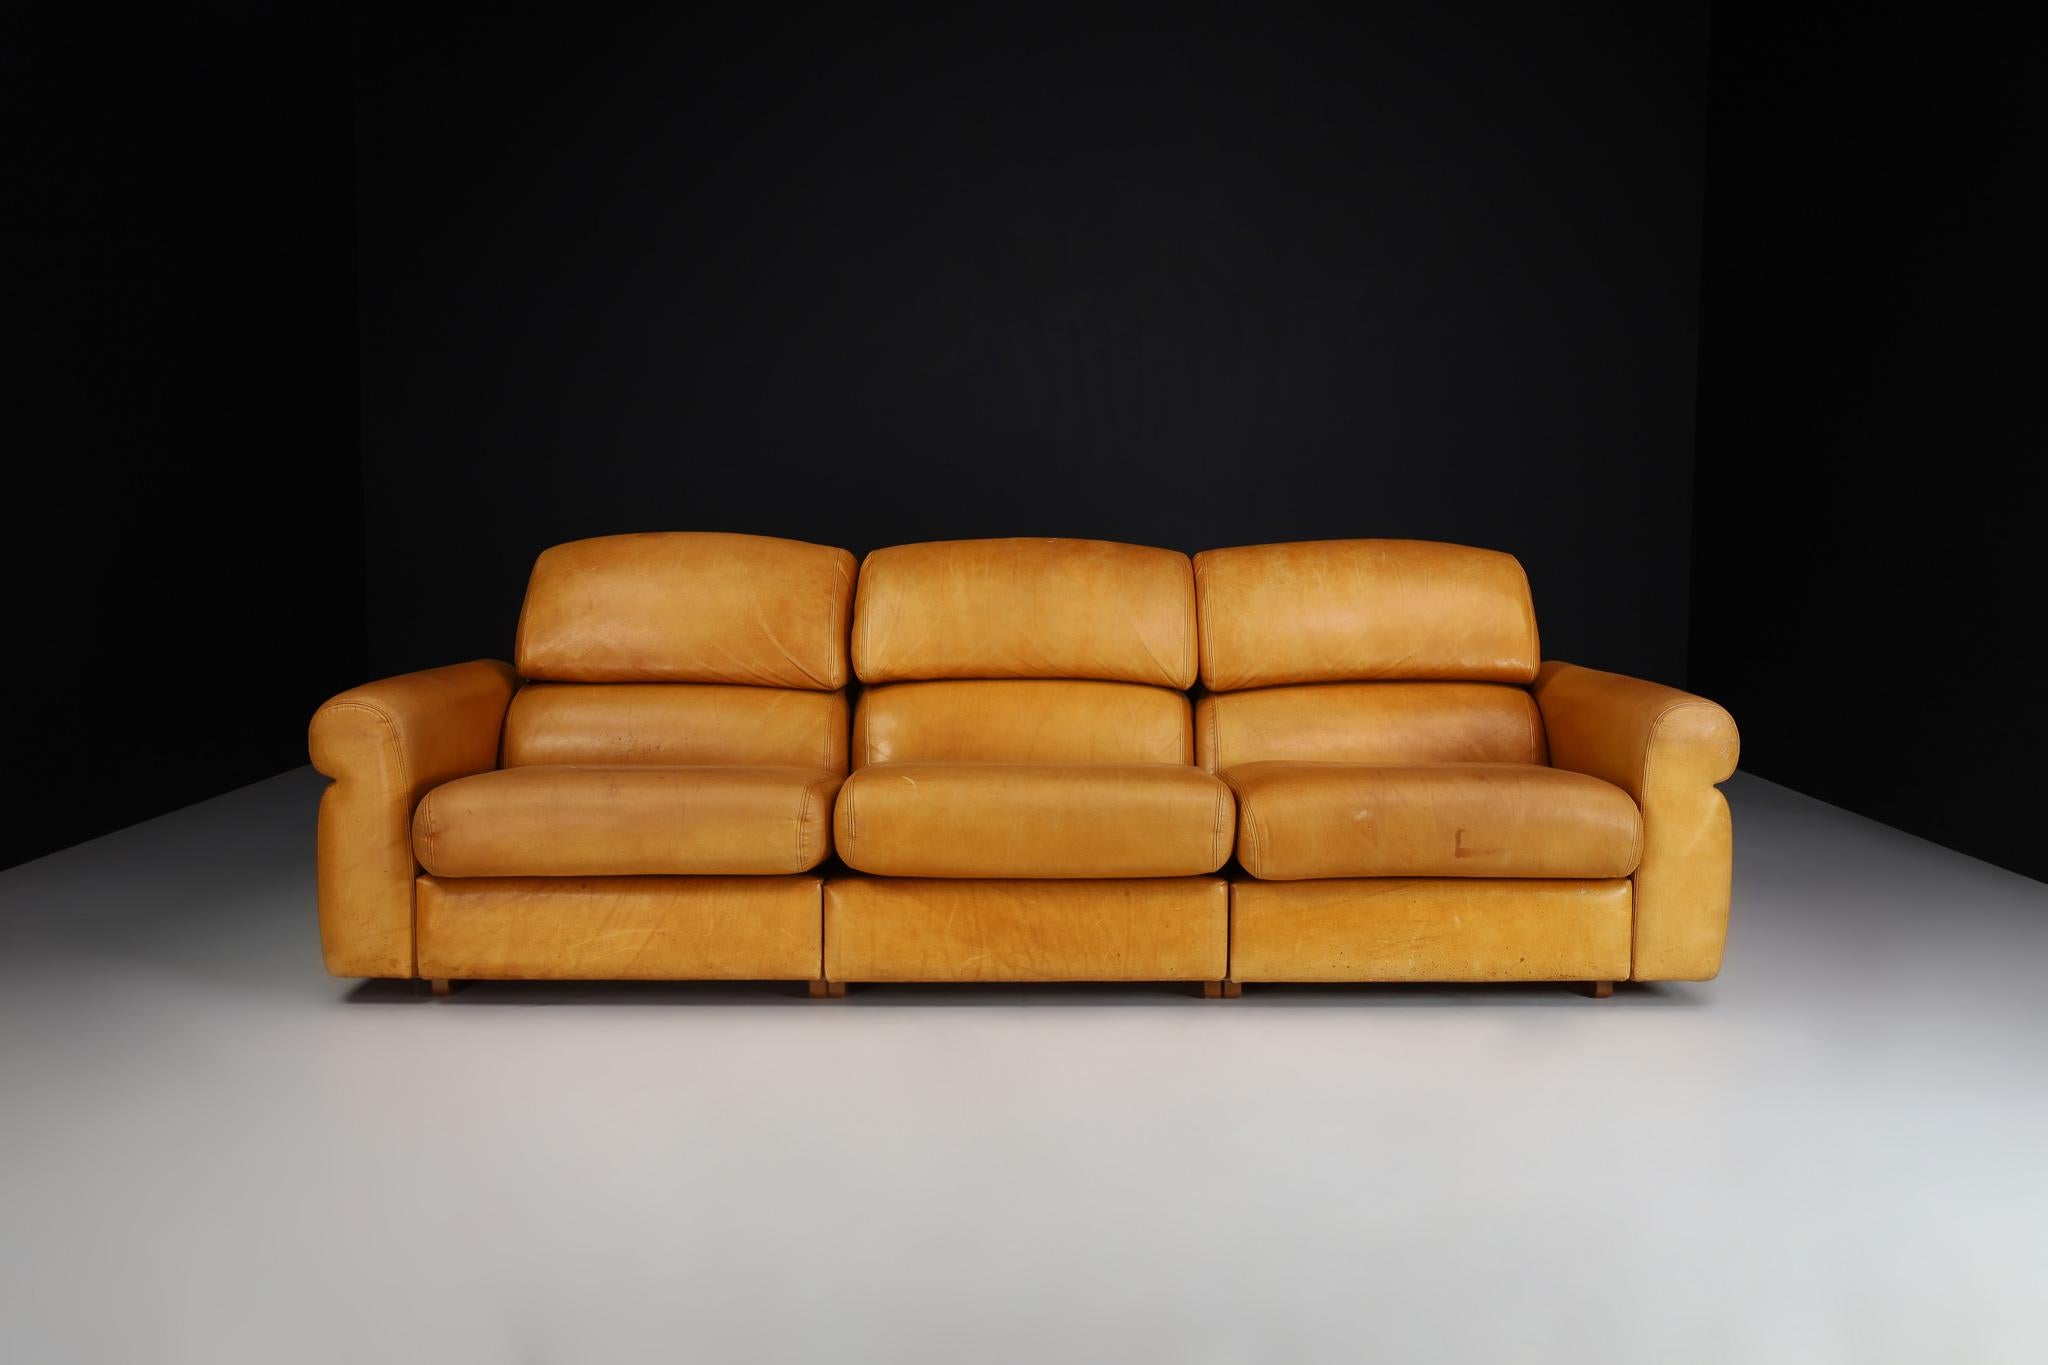 Italian Large Mid-Century Modern Lounge Sofa in Cognac Leather, Italy 1960s For Sale